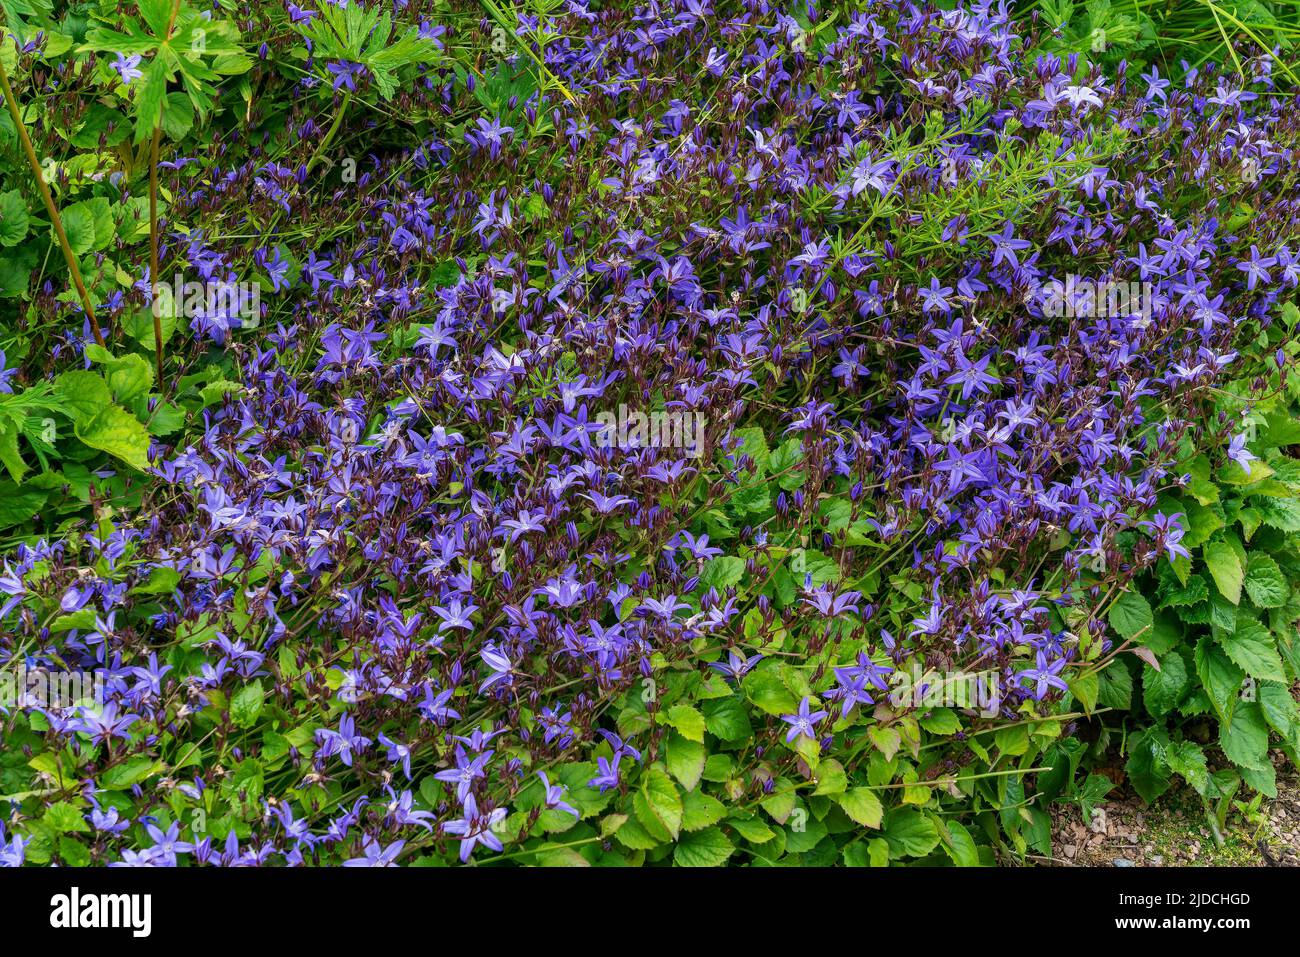 Campanula poscharskyana 'Stella' a summer flowering plant with a purple blue summertime ground covering flower commonly known as trailing bellflower, Stock Photo